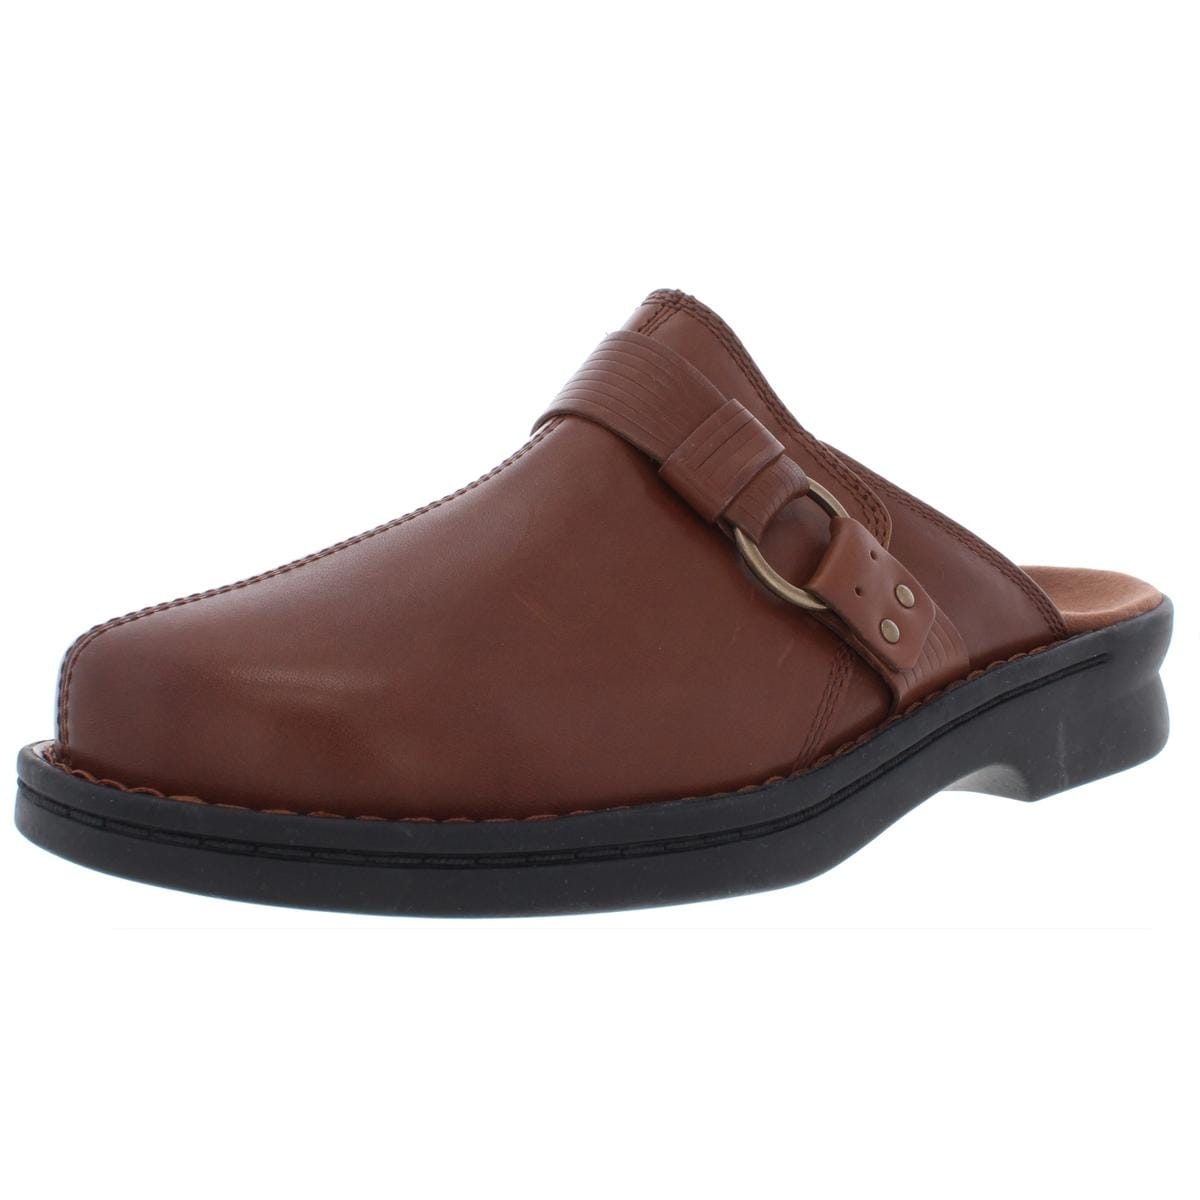 clarks leather slip on clogs